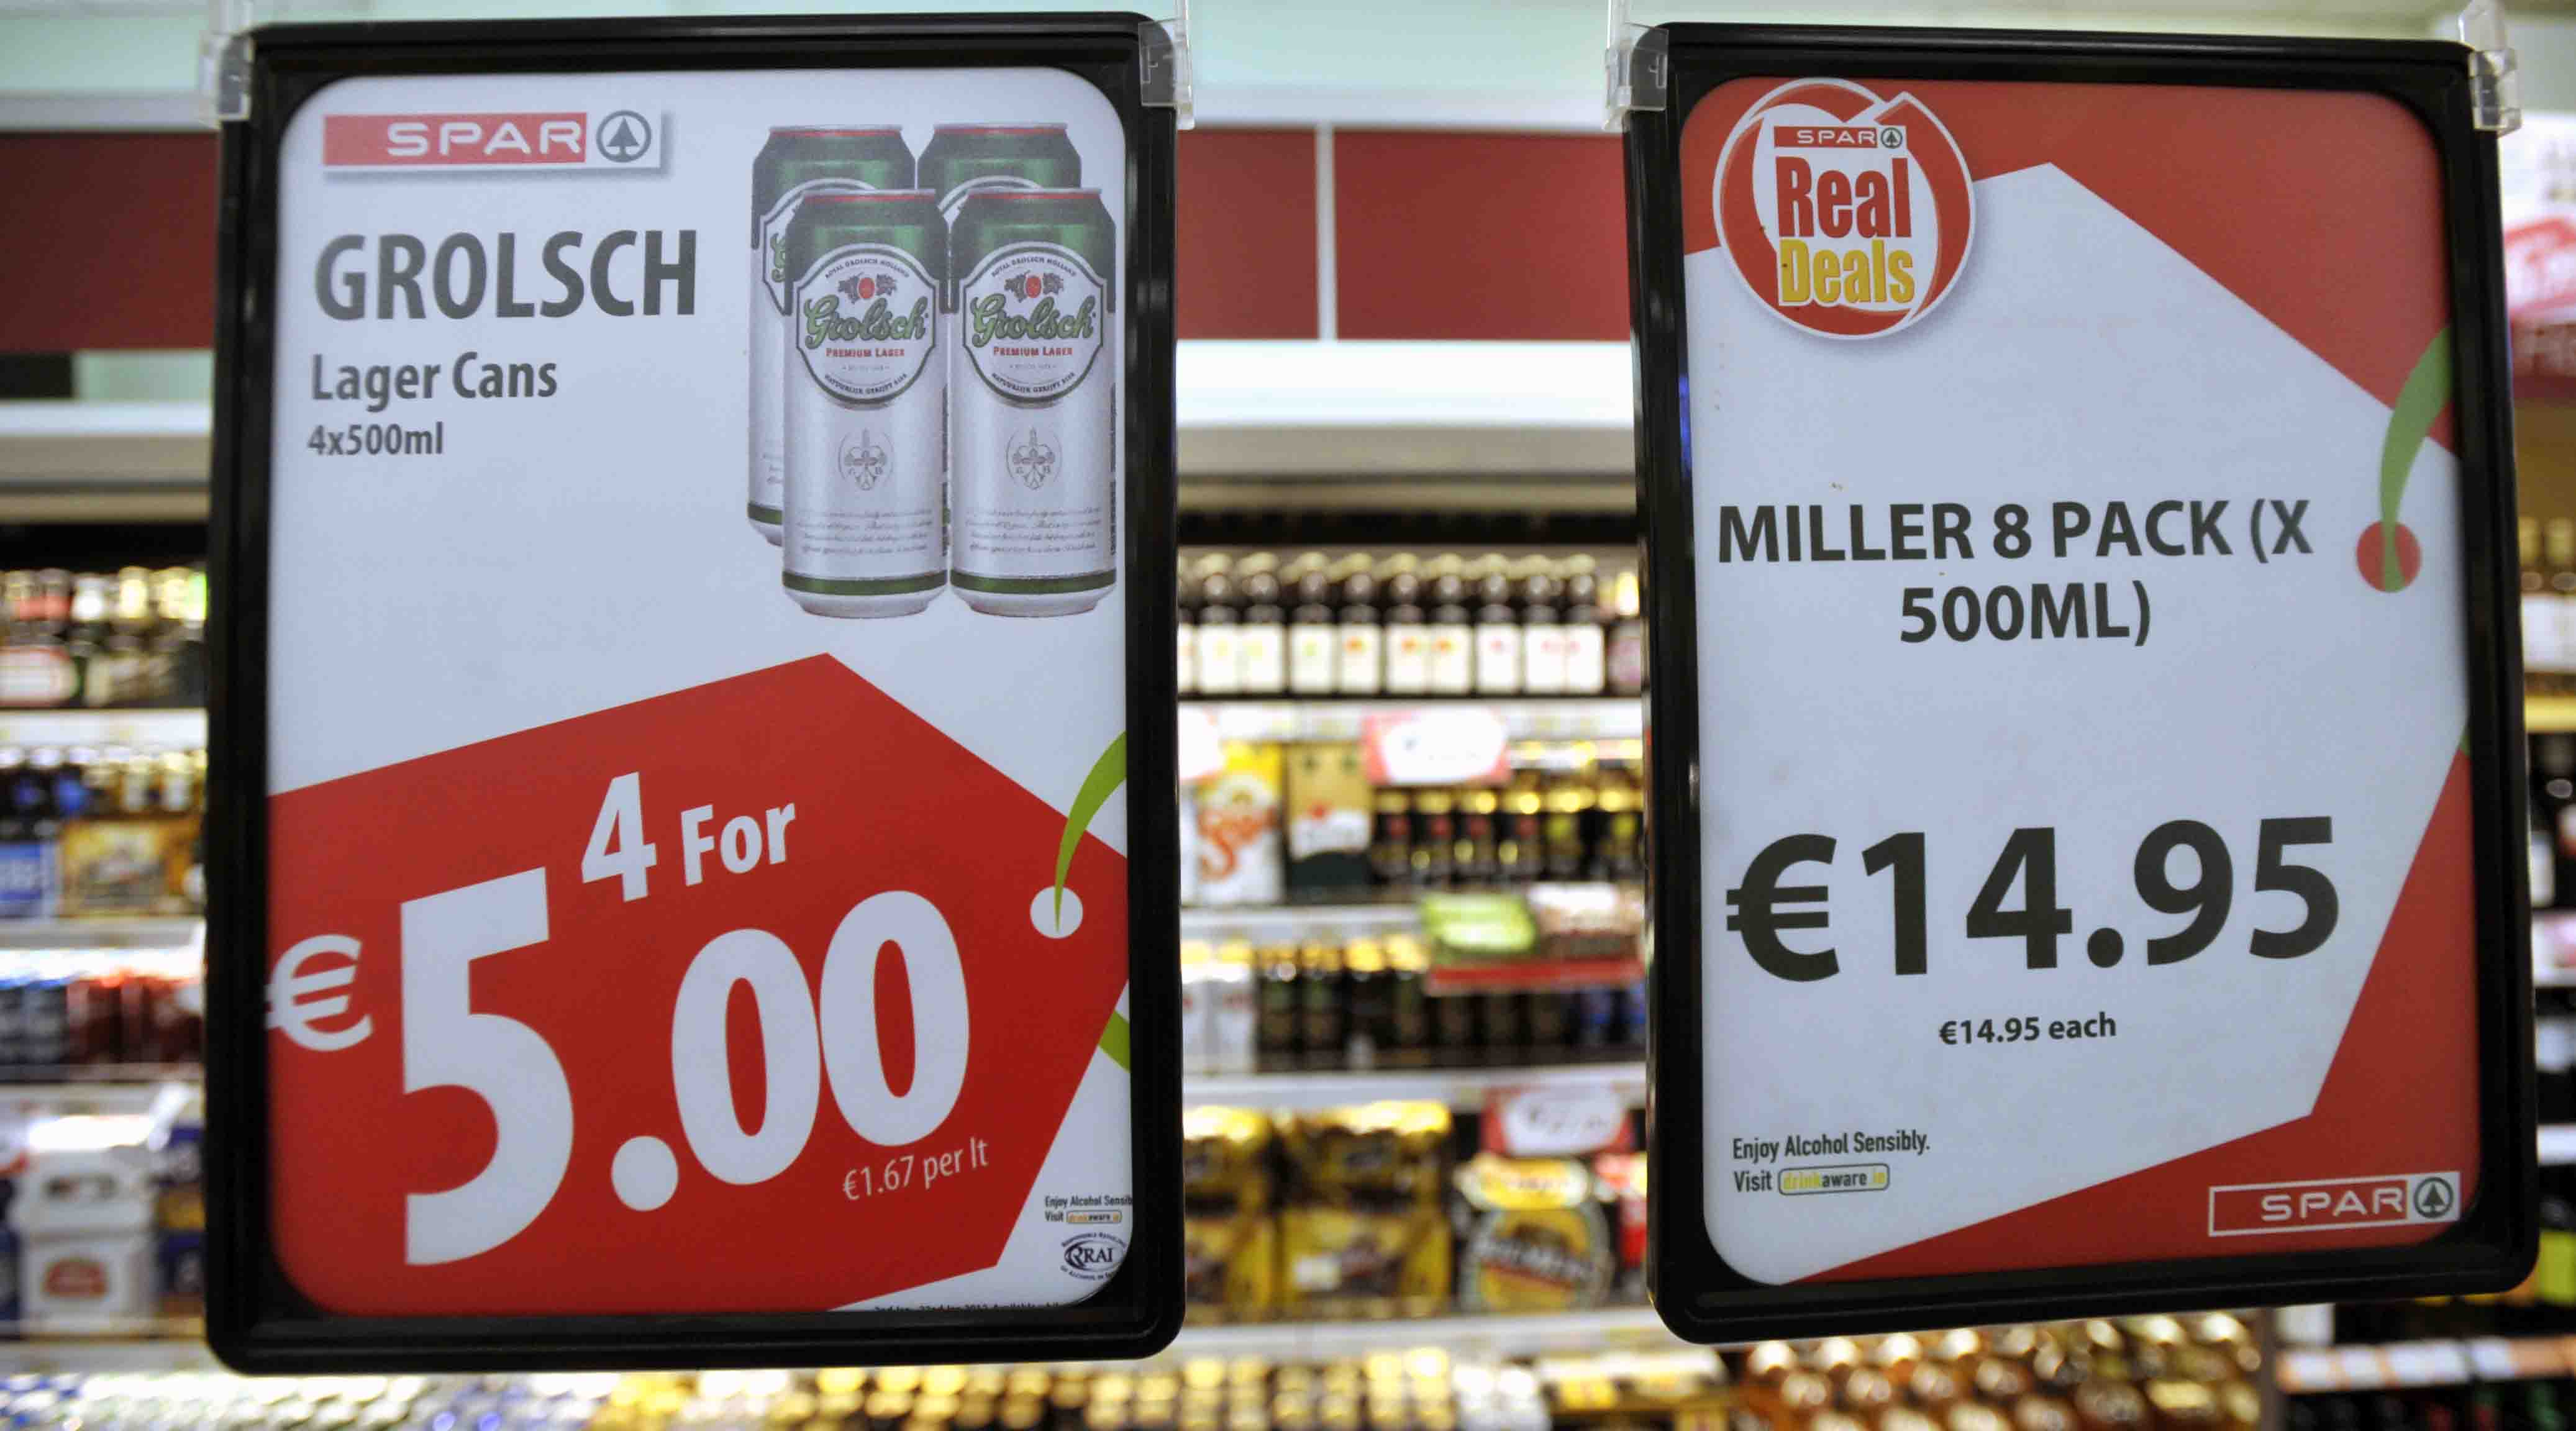 The new regulations mean the shelving of popular multi-buy deals in supermarkets and off-licences.